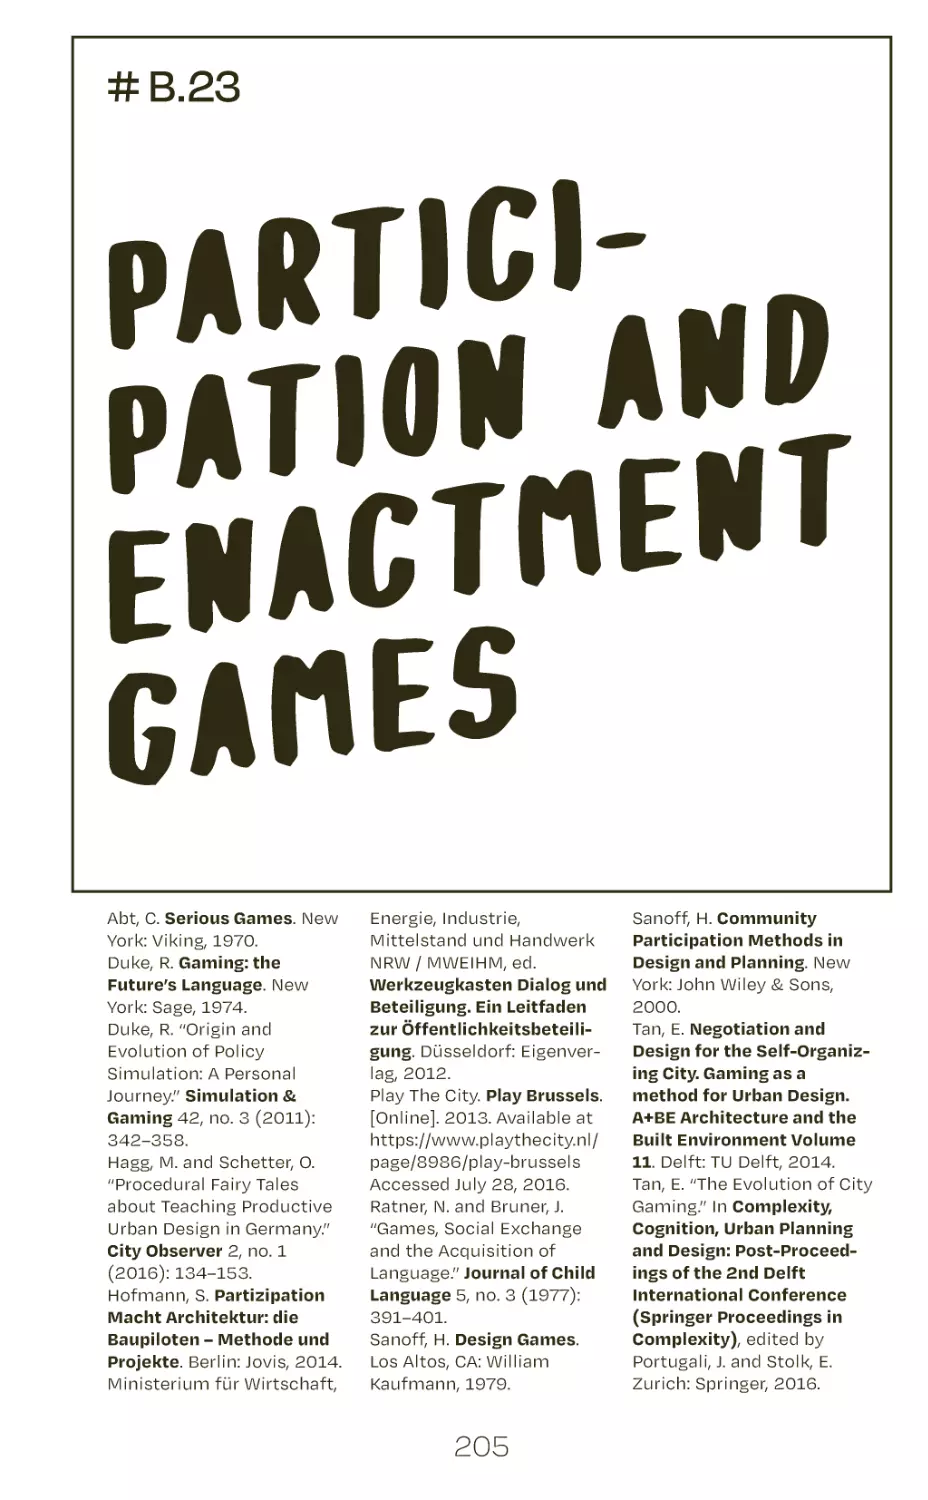 # B.23 participation and enactment games